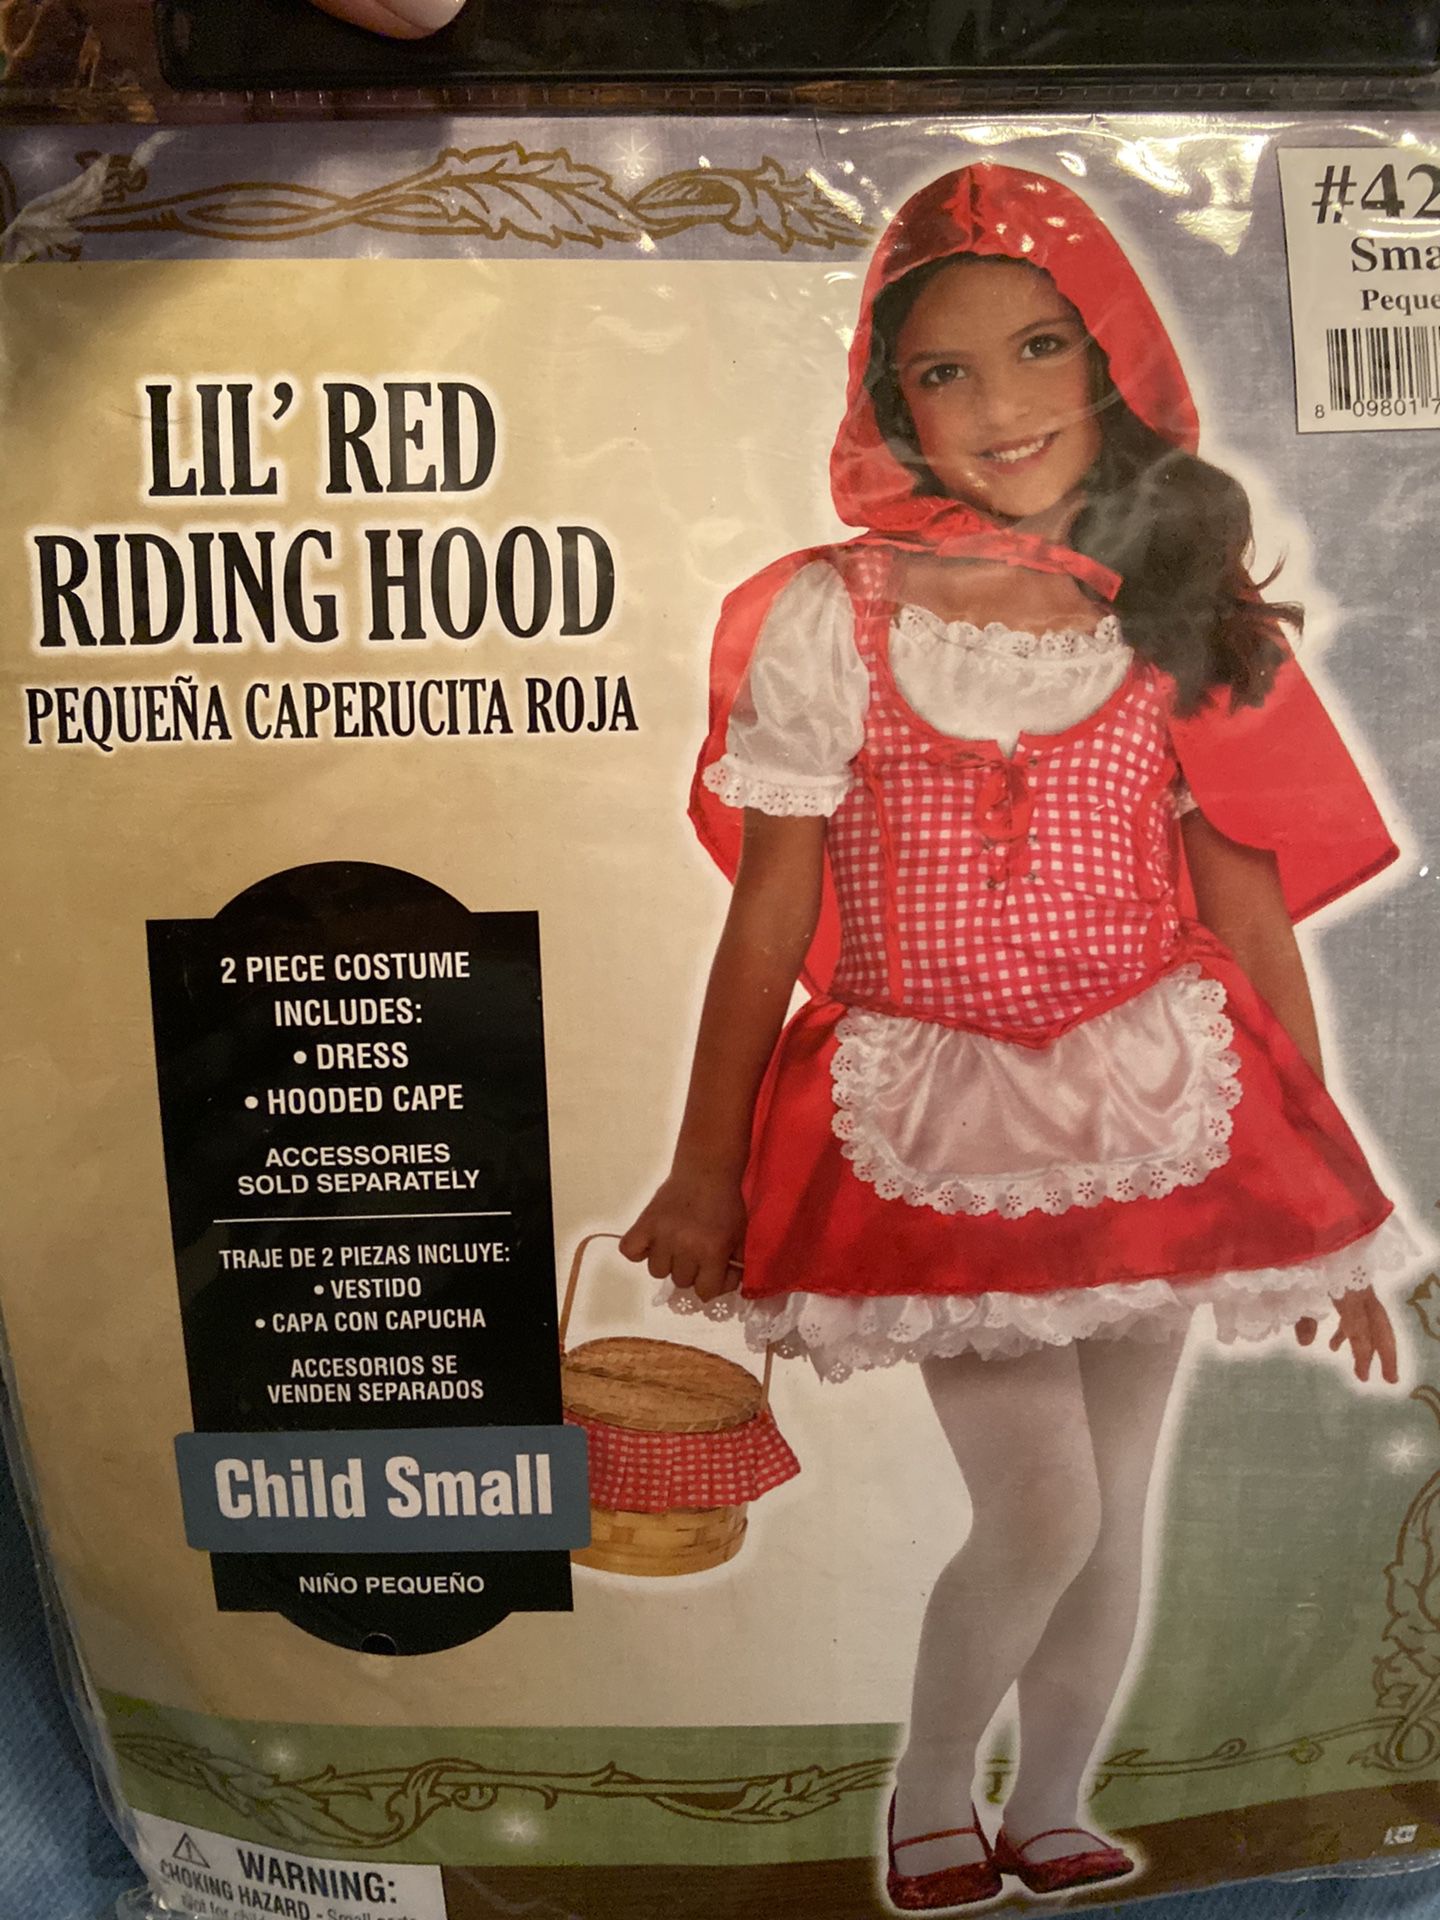 Little red riding hood costume.